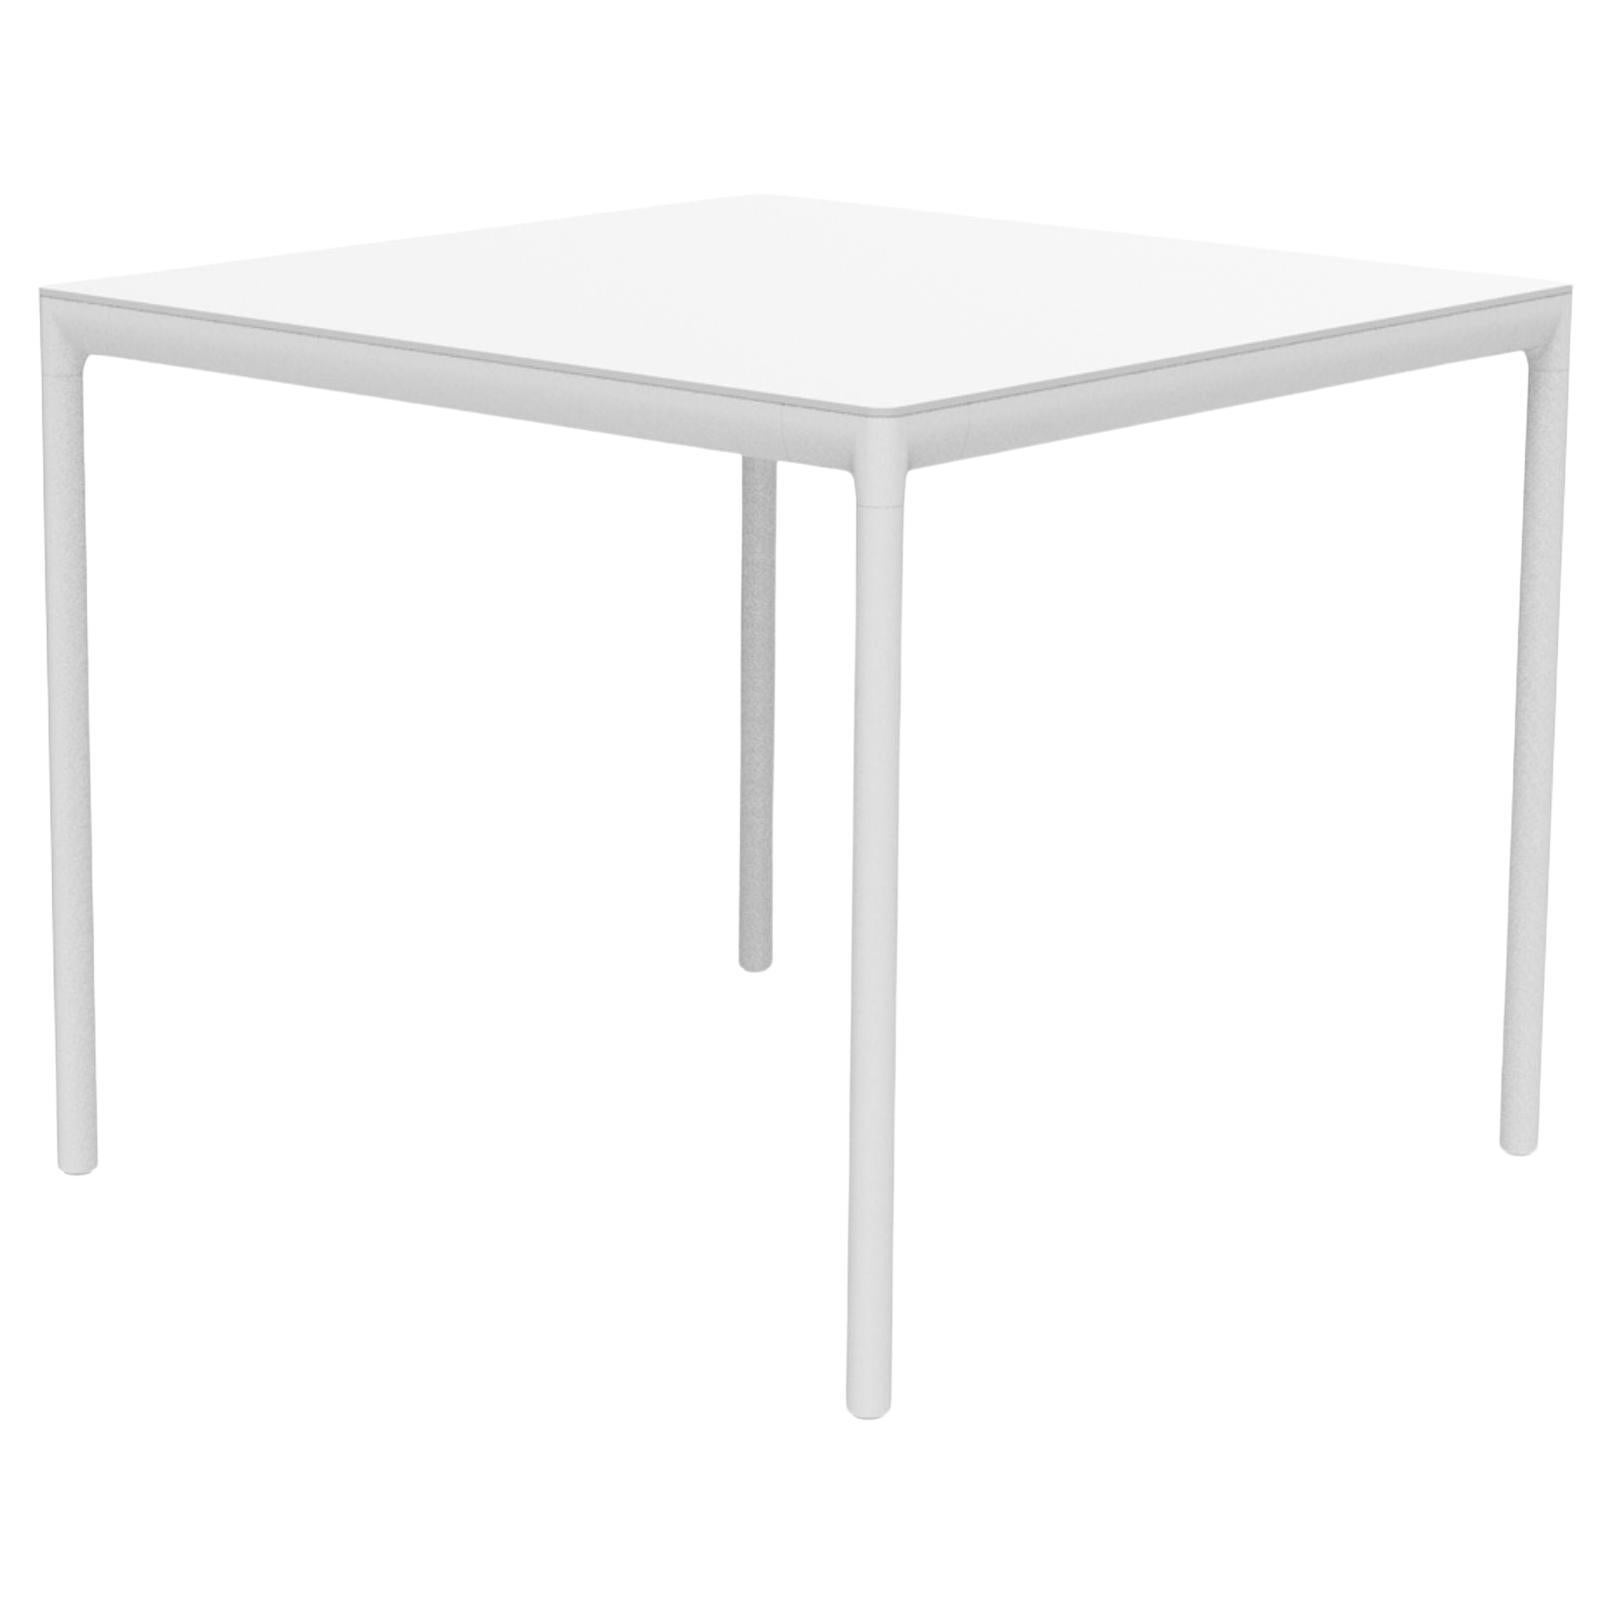 Ribbons White 90 Table by Mowee For Sale